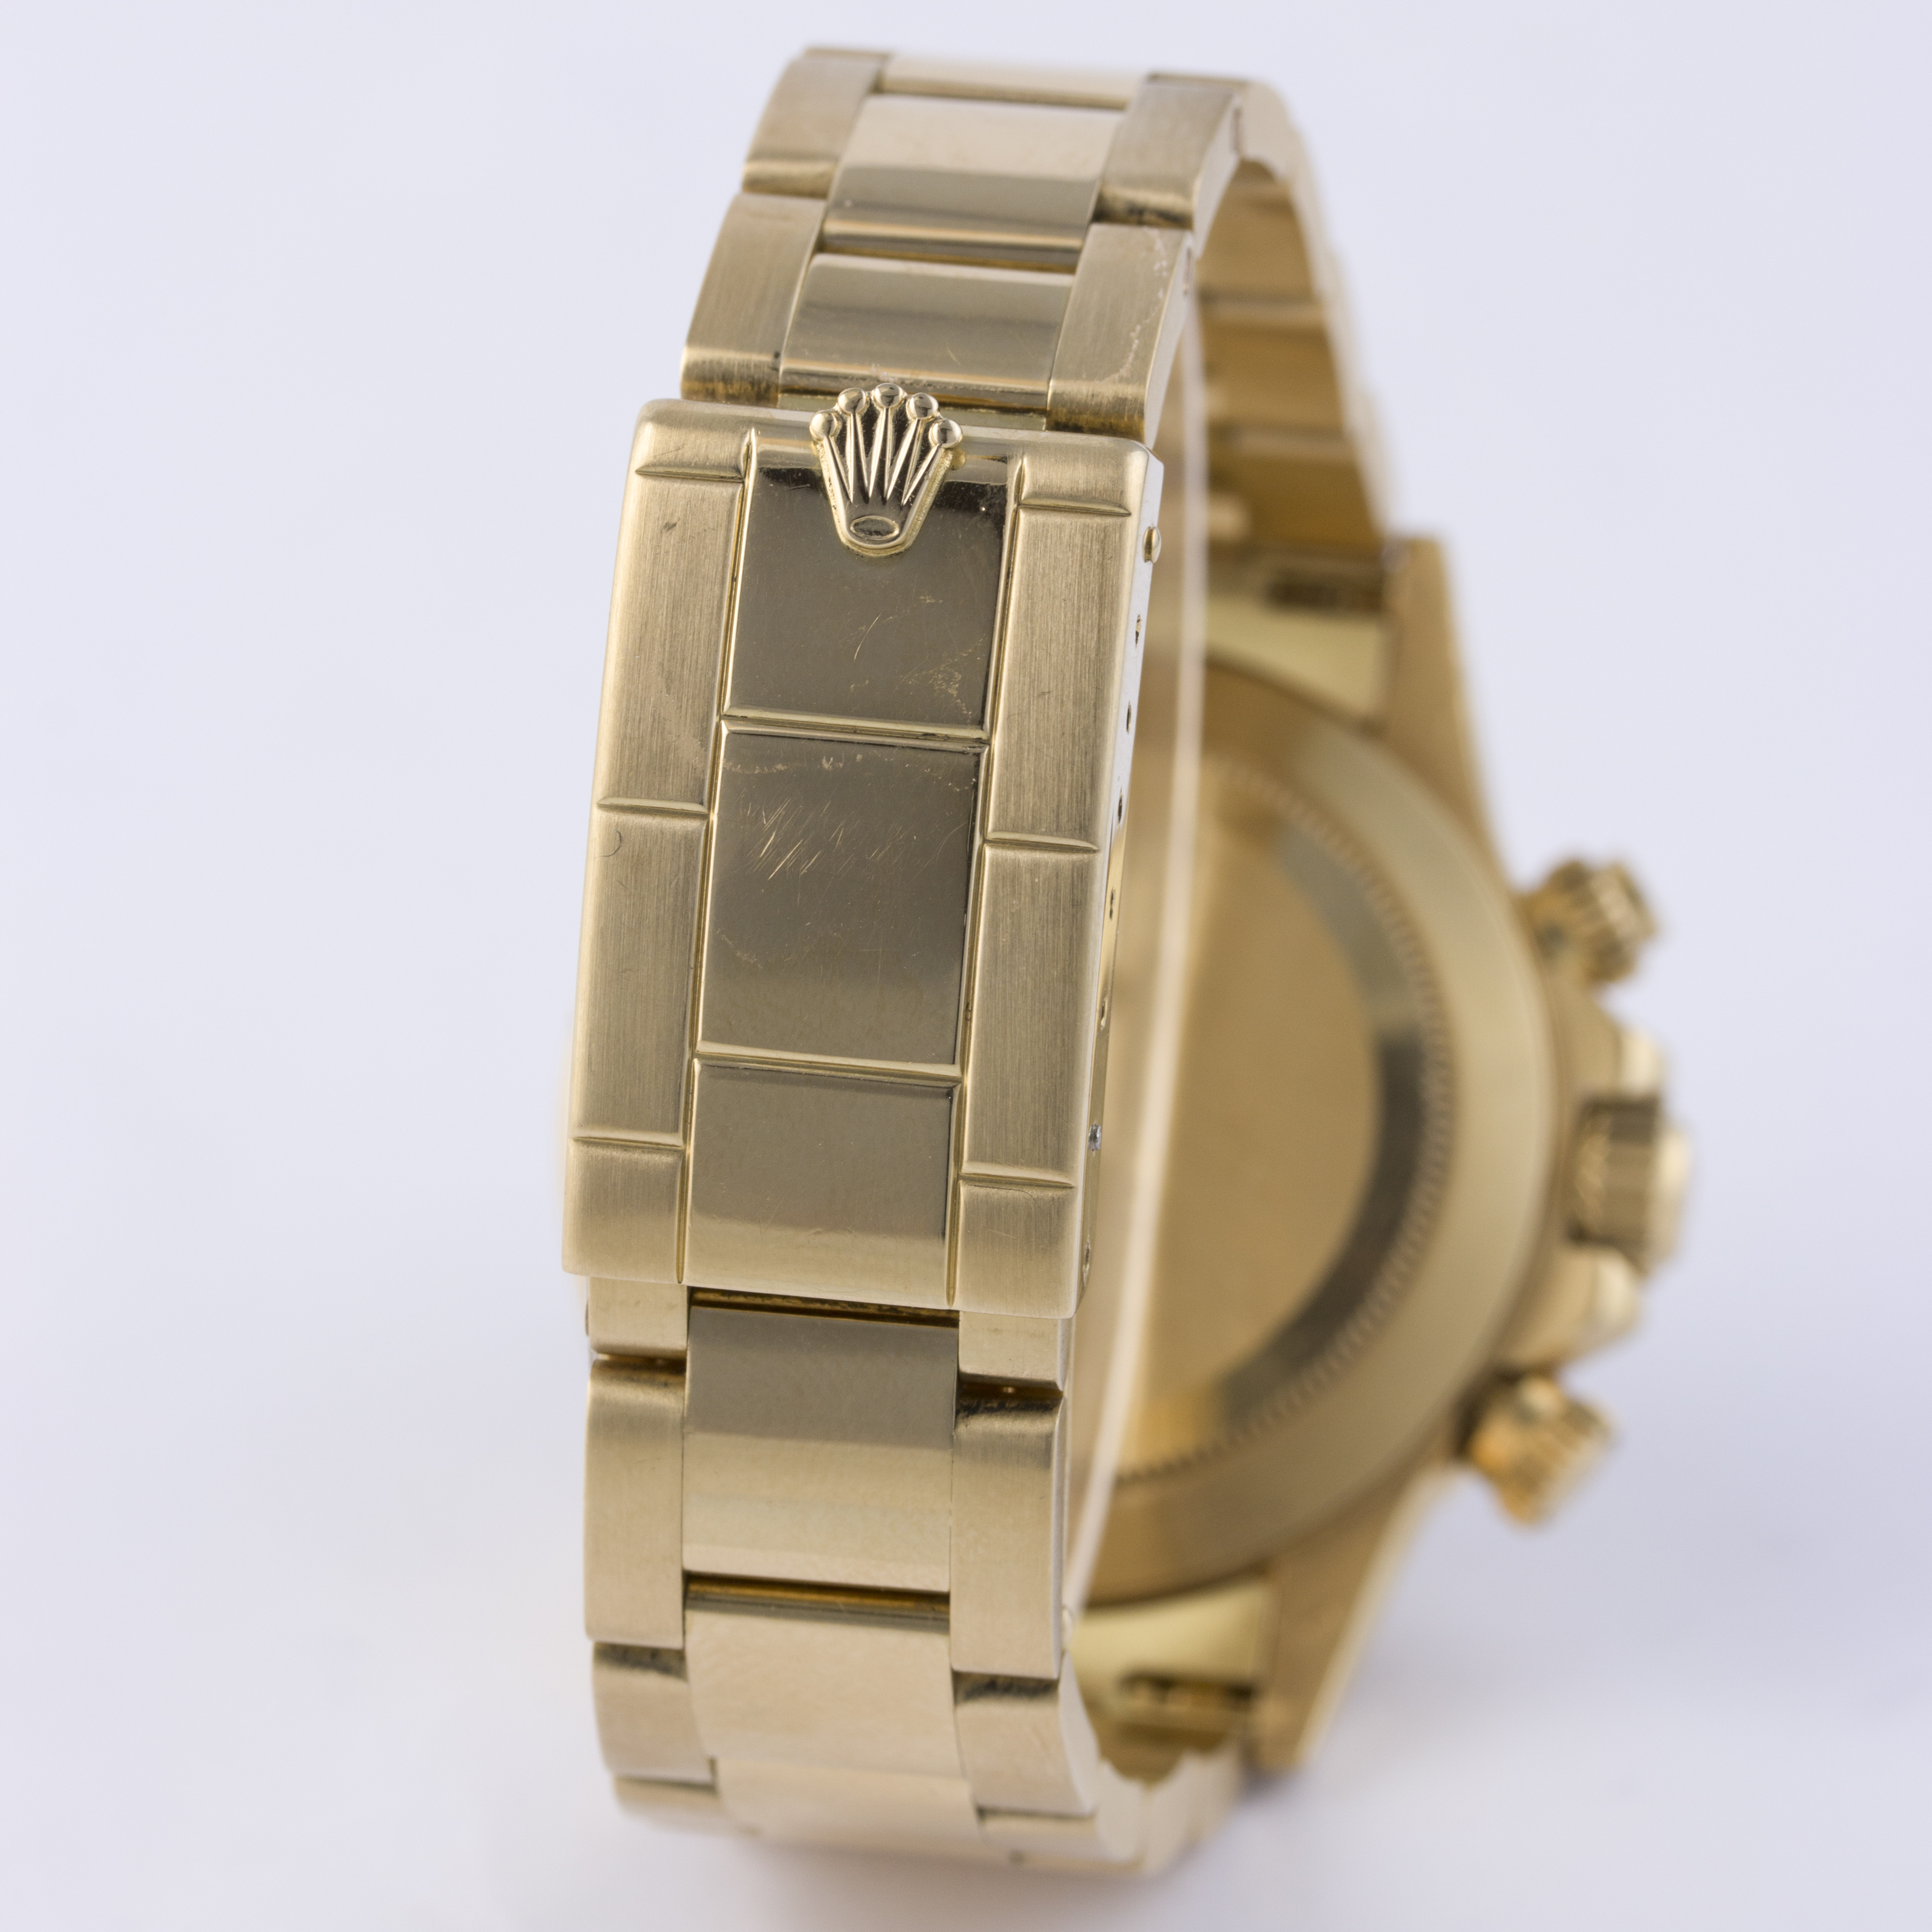 A FINE & RARE GENTLEMAN'S 18K SOLID GOLD ROLEX OYSTER PERPETUAL "FLOATING DIAL" COSMOGRAPH DAYTONA - Image 5 of 6